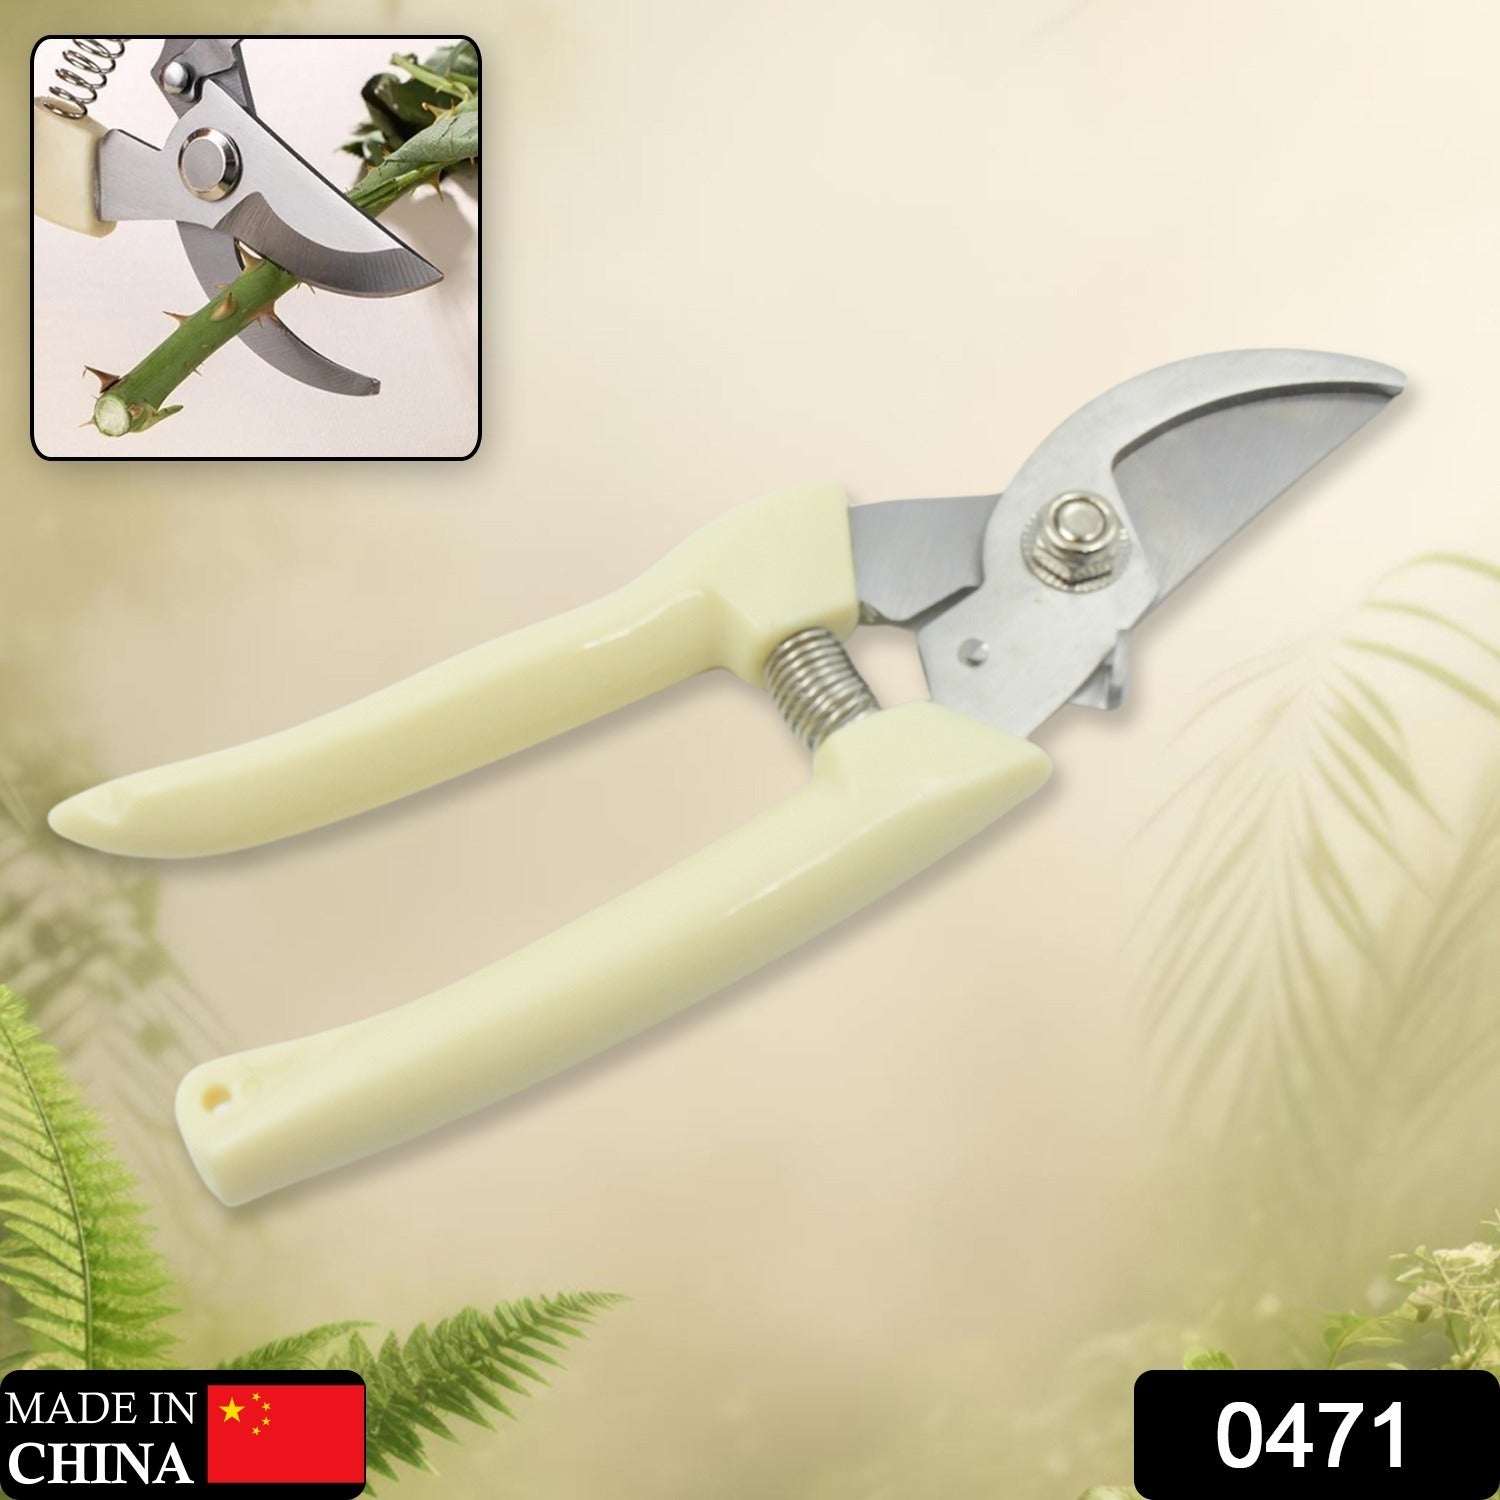 0471 Stainless Steel Pruning Shears with Sharp Blades and Comfortable handle - Durable Hand Pruner for Comfortable and Easy Cutting, Heavy Duty Gardening Cutter Tool Plant Cutter for Home Garden | Wood Bran (1 Pc)